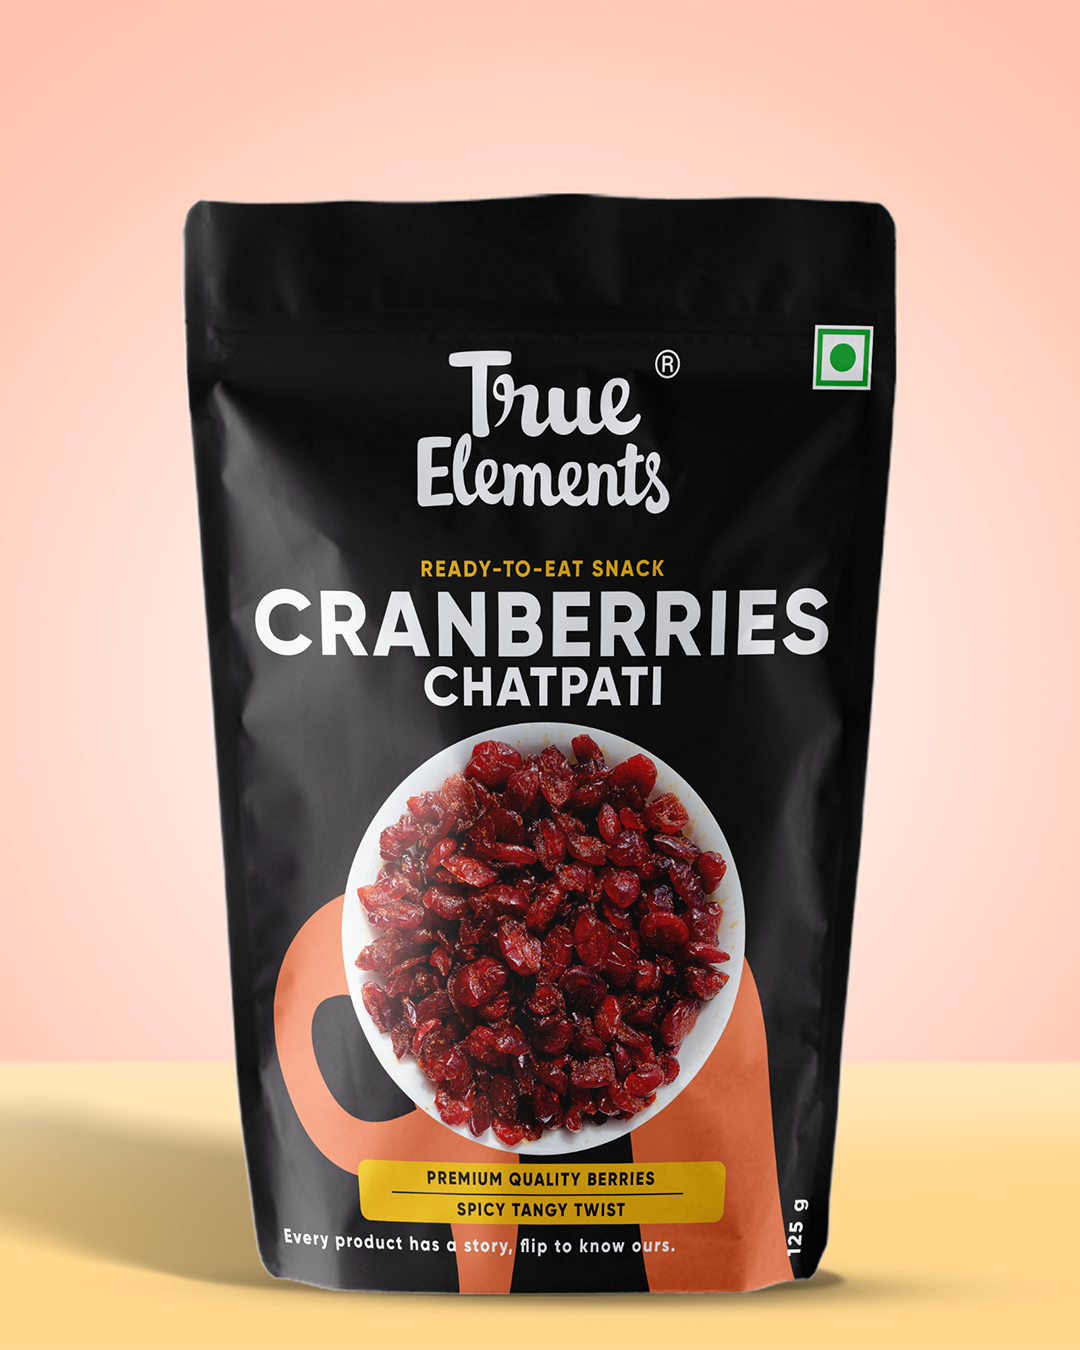 True Elements Chatpati Cranberries 125gm ready to eat snack